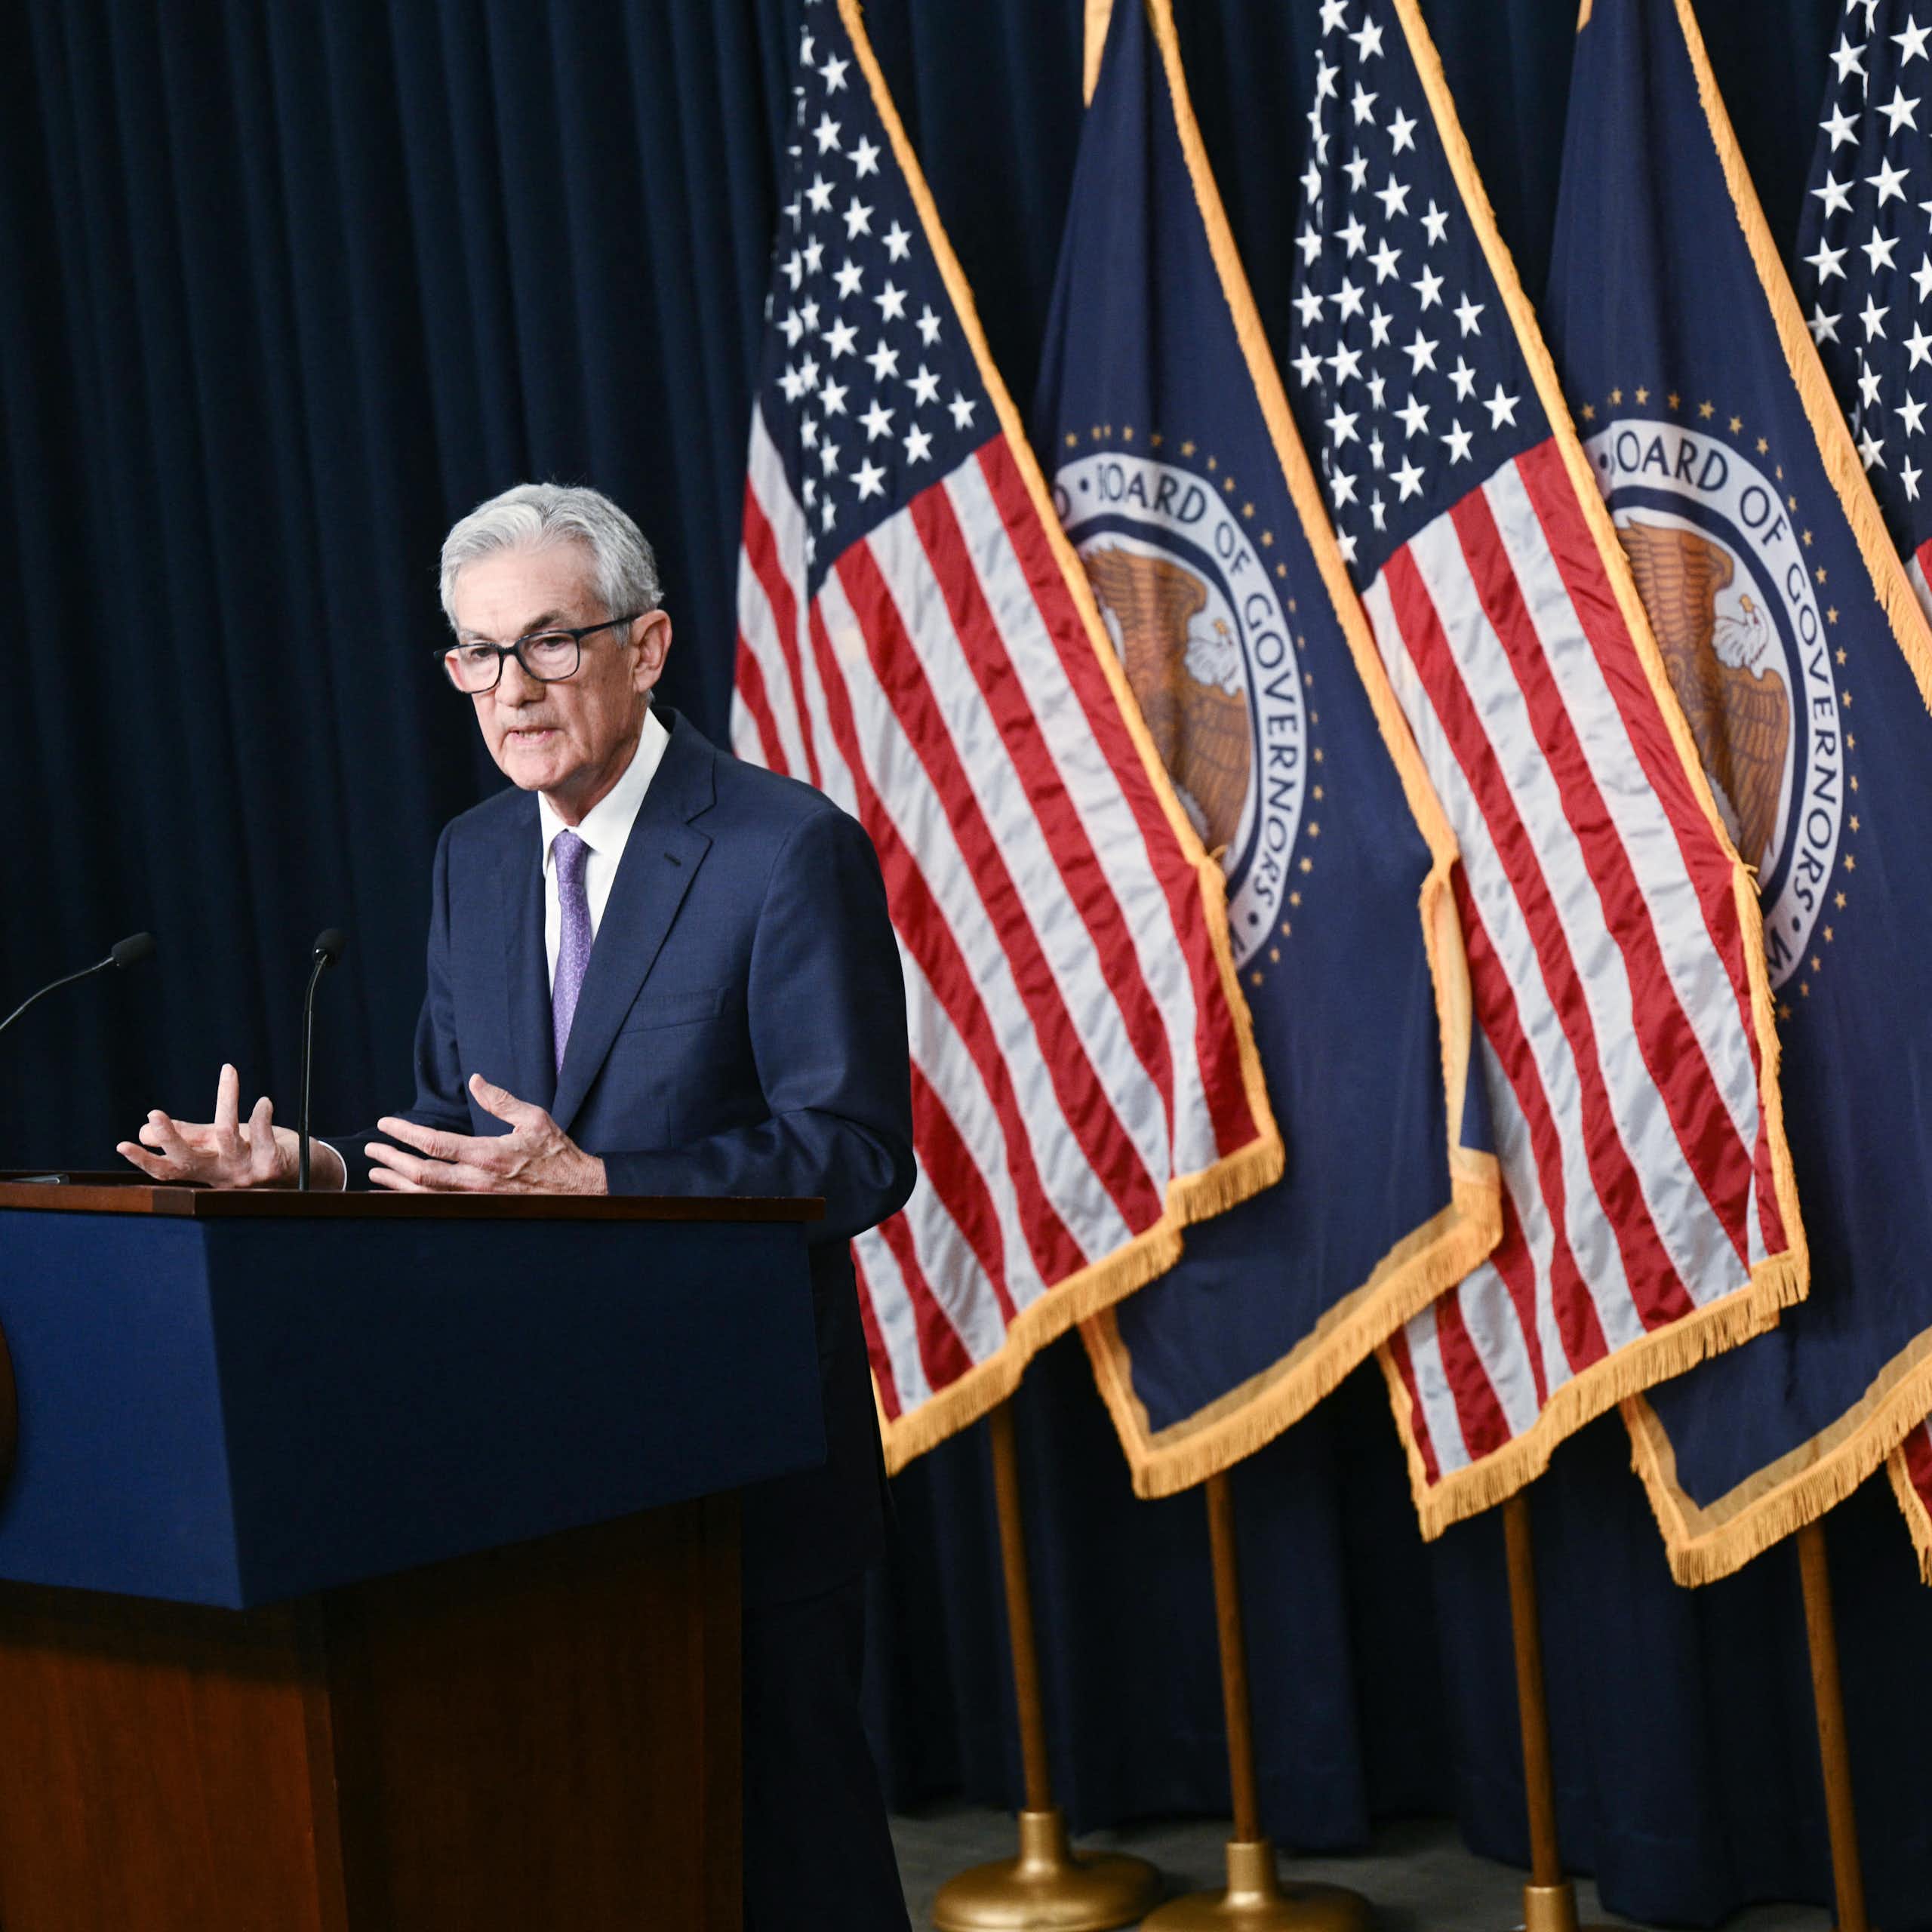 A central banker in a navy blue suit stands behind a podium and in front of a series of American flags. He appears to be speaking, and is gesticulating for emphasis.